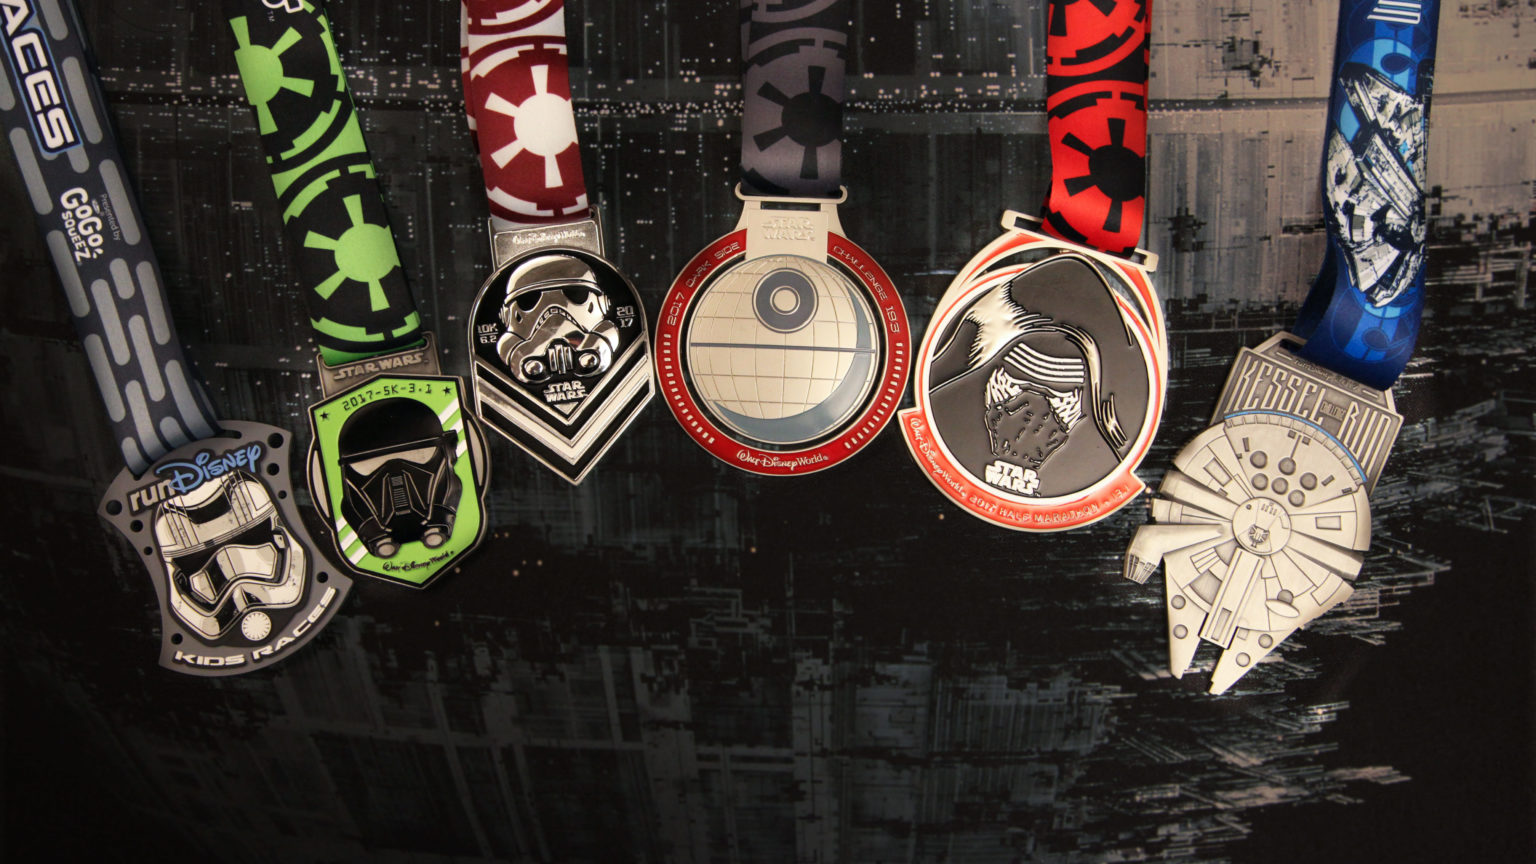 Take a Look at The Run Disney Star Wars Dark Side Race Medals